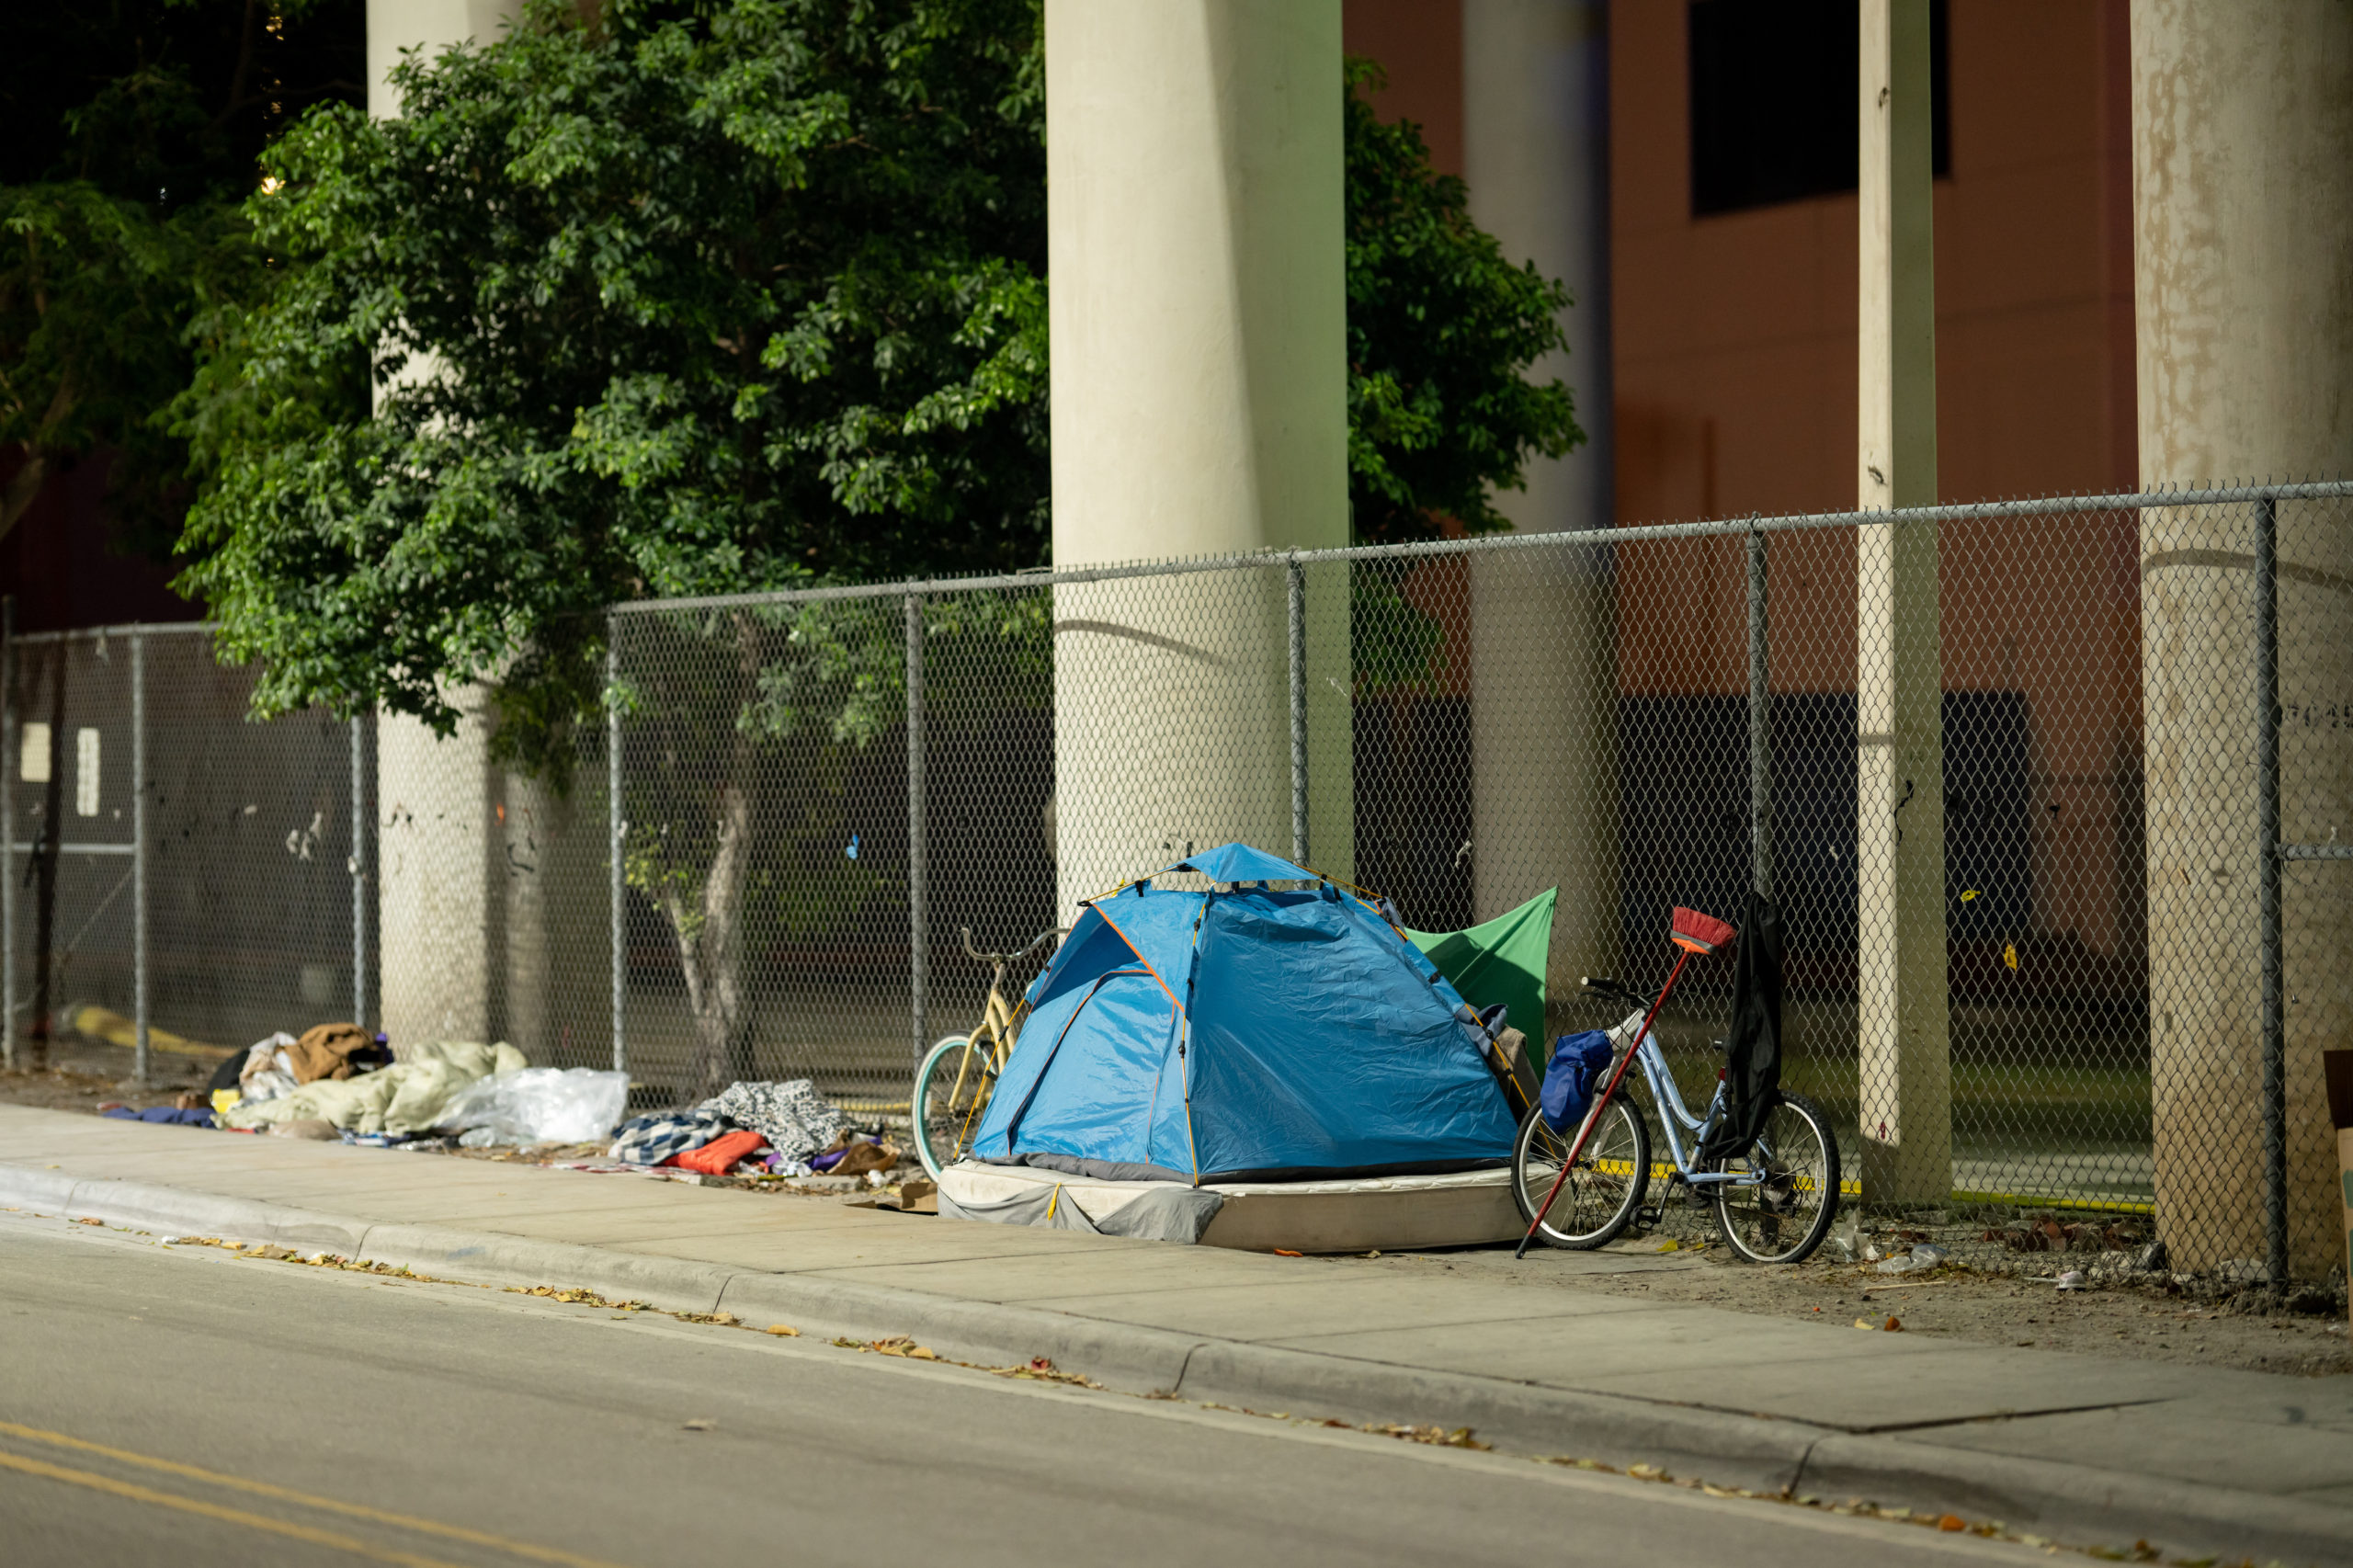 Homeless camp in tents on city sidewalk